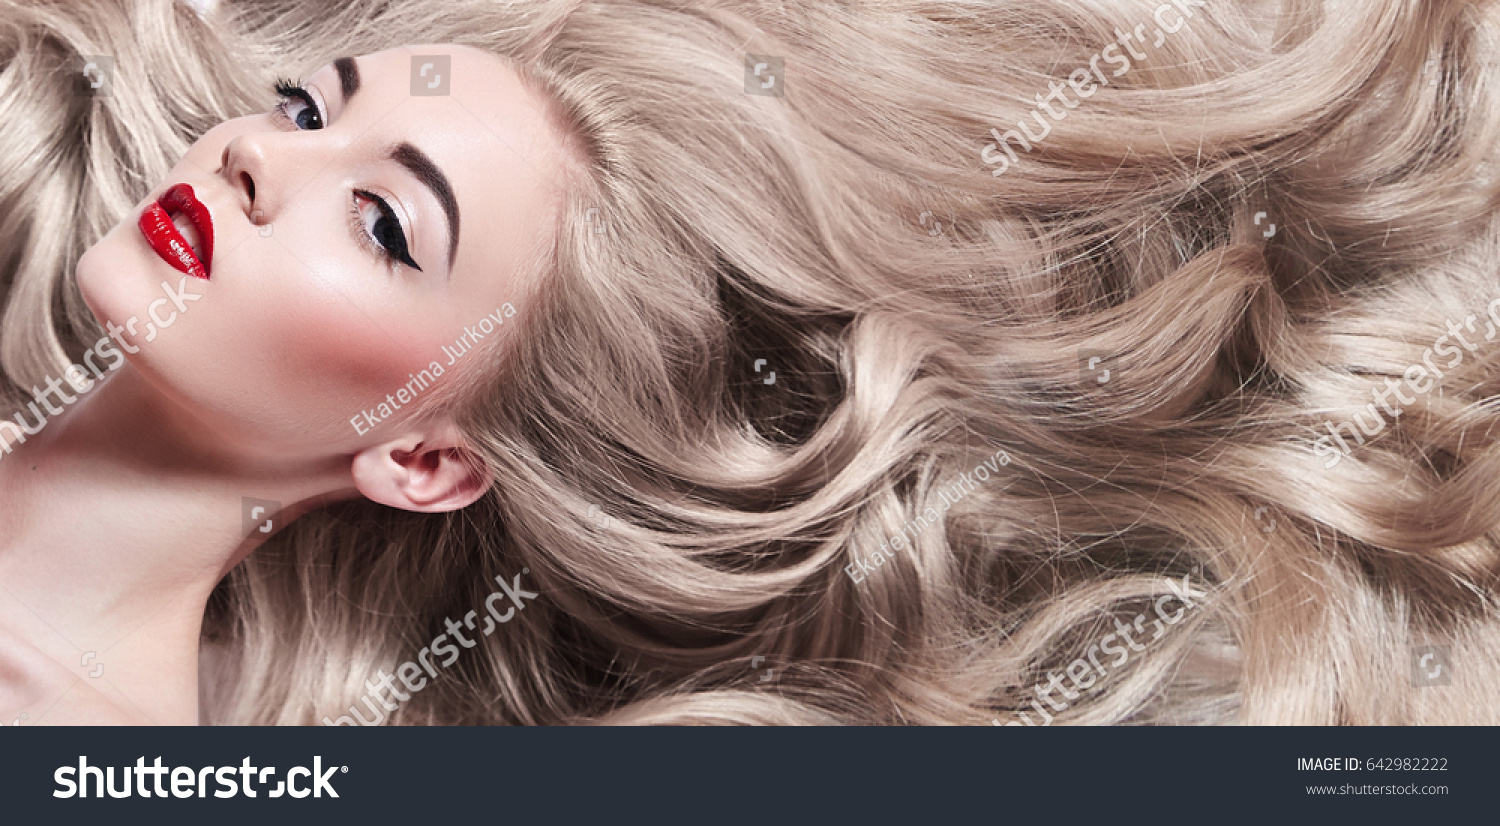 Beautiful young well-groomed girl lies - close-up. Long light shiny healthy well-groomed long hair. Advertising of hair care, cosmetics, beauty. Makeup - red lips, black arrows, mascara. #642982222